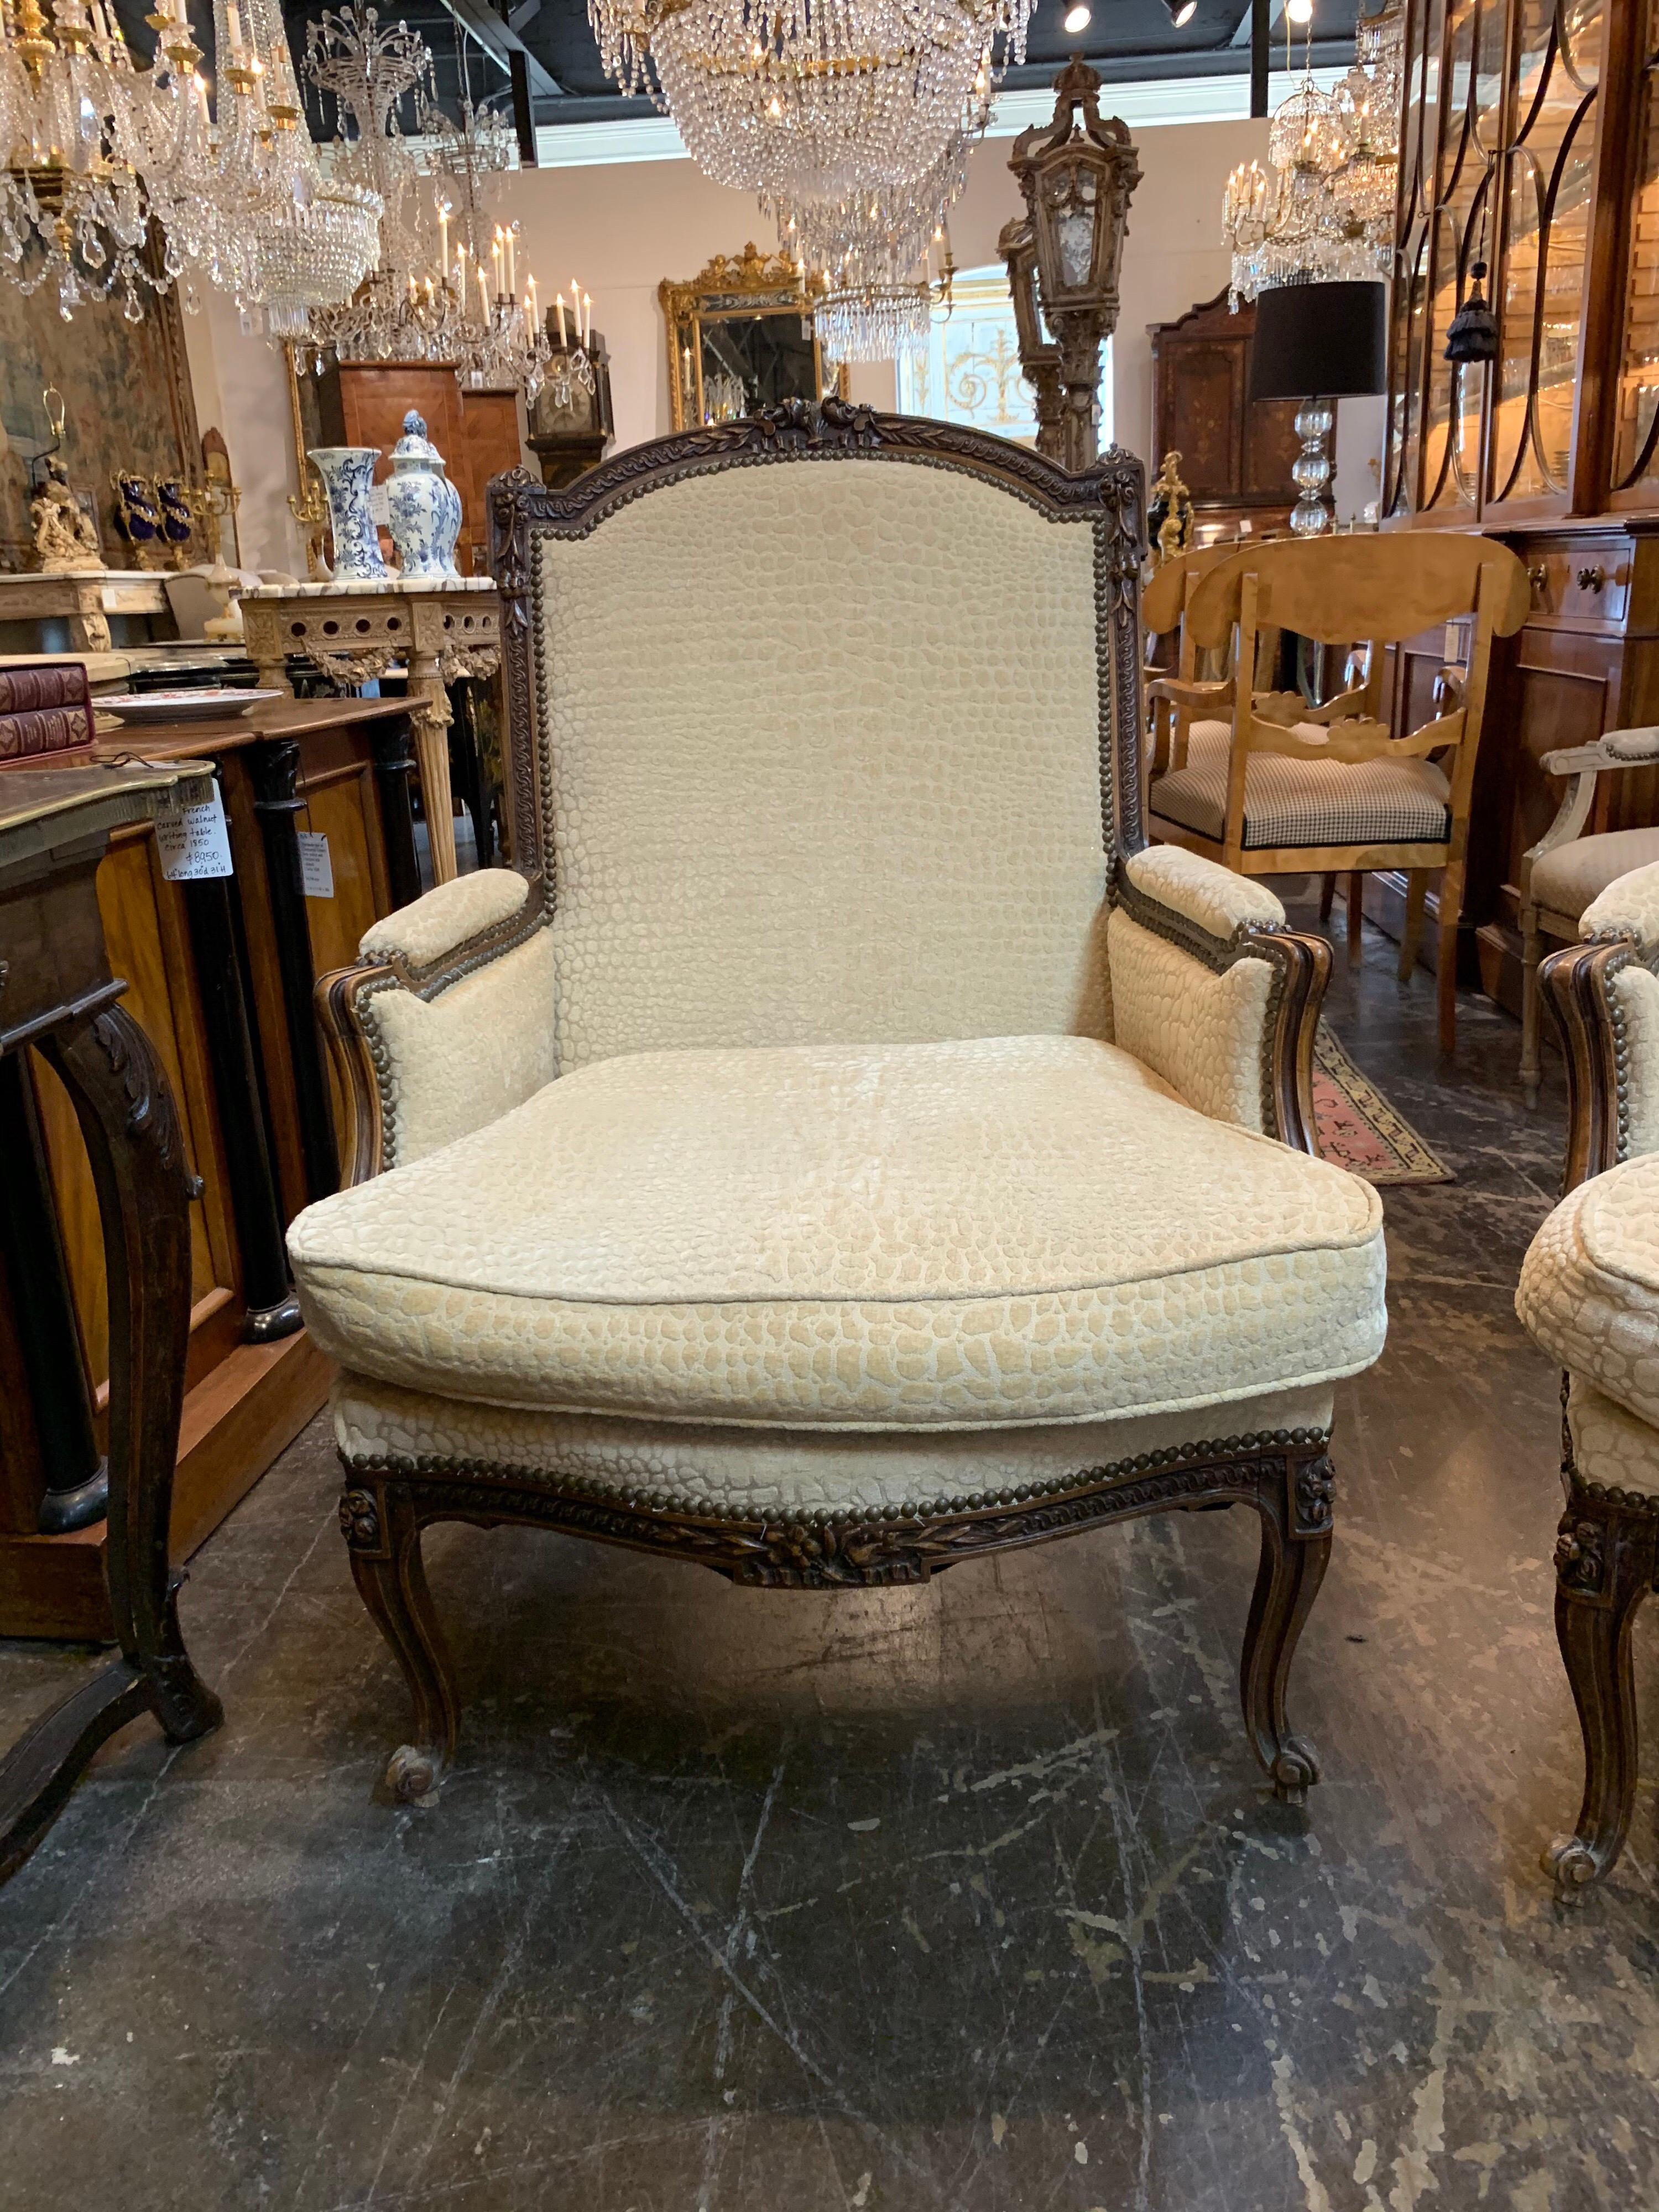 Very fine pair of large scale 19th century French carved walnut armchairs. Incredible intricate beautiful carvings. And upholstered in a lovely crème colored fabric. So elegant!